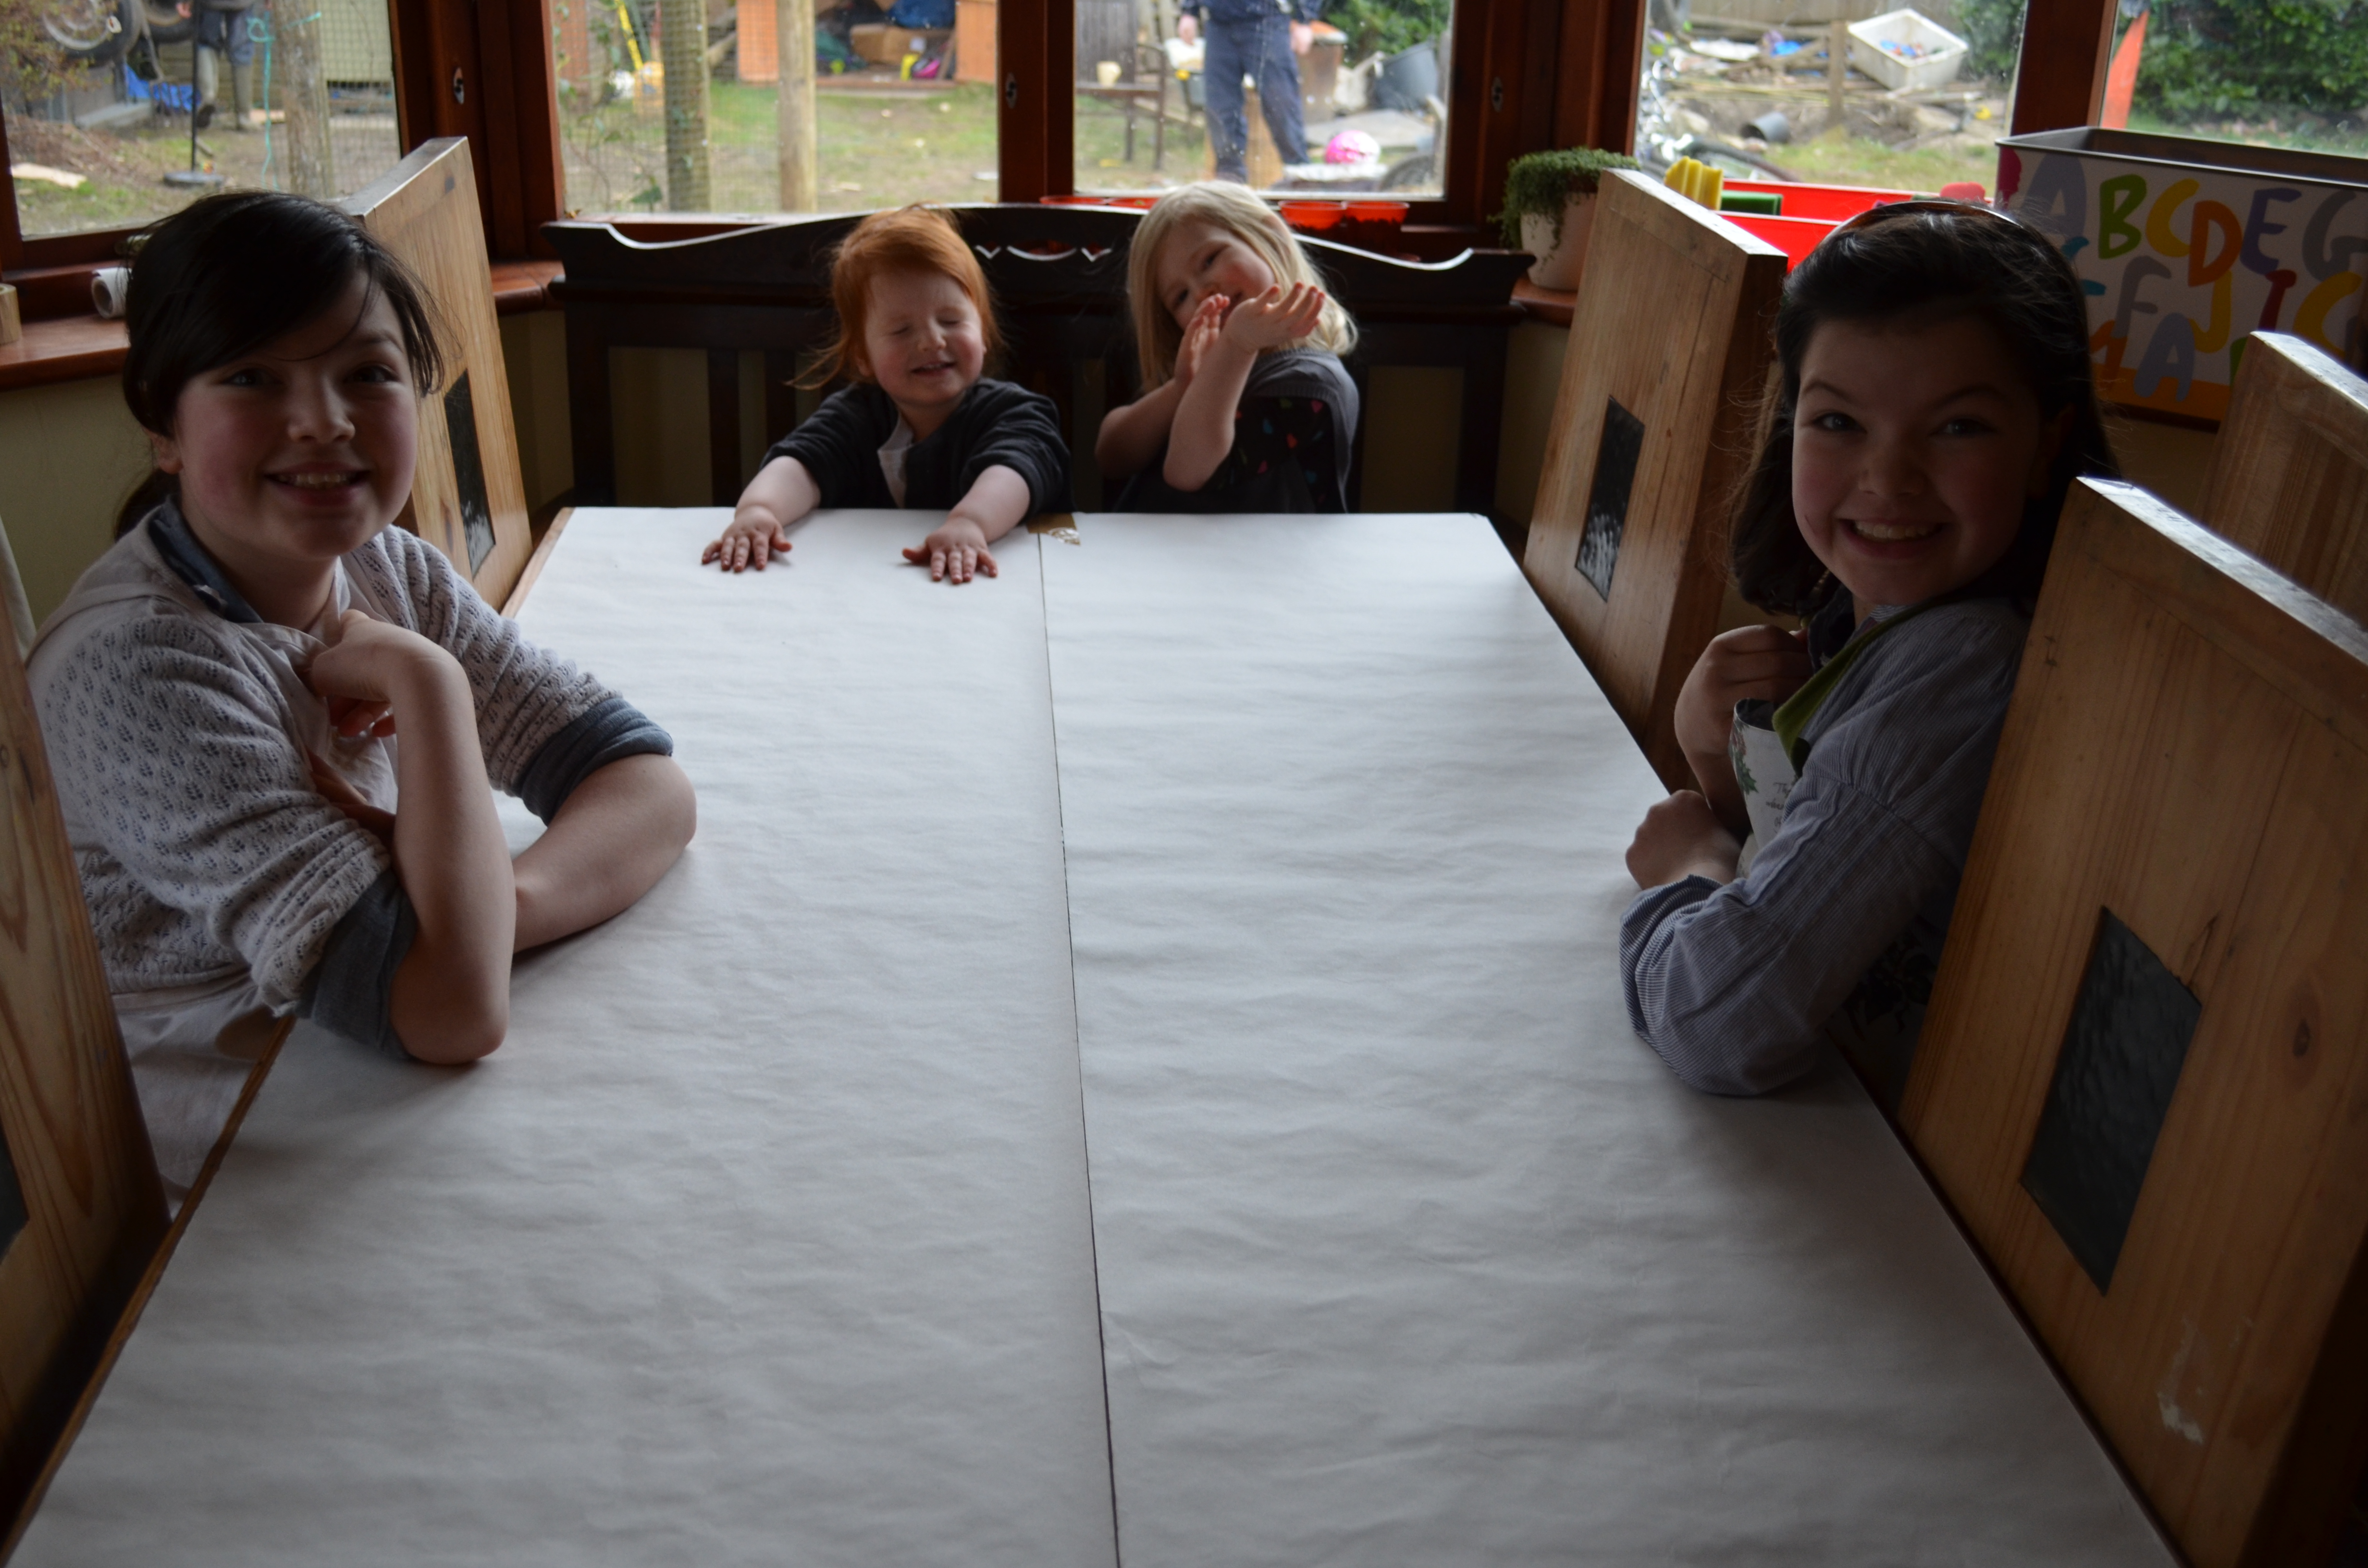 First I covered the table with lining paper, taping it down at both ends.  I gave the two younger children tops which T11 had grown out of, to protect their clothes